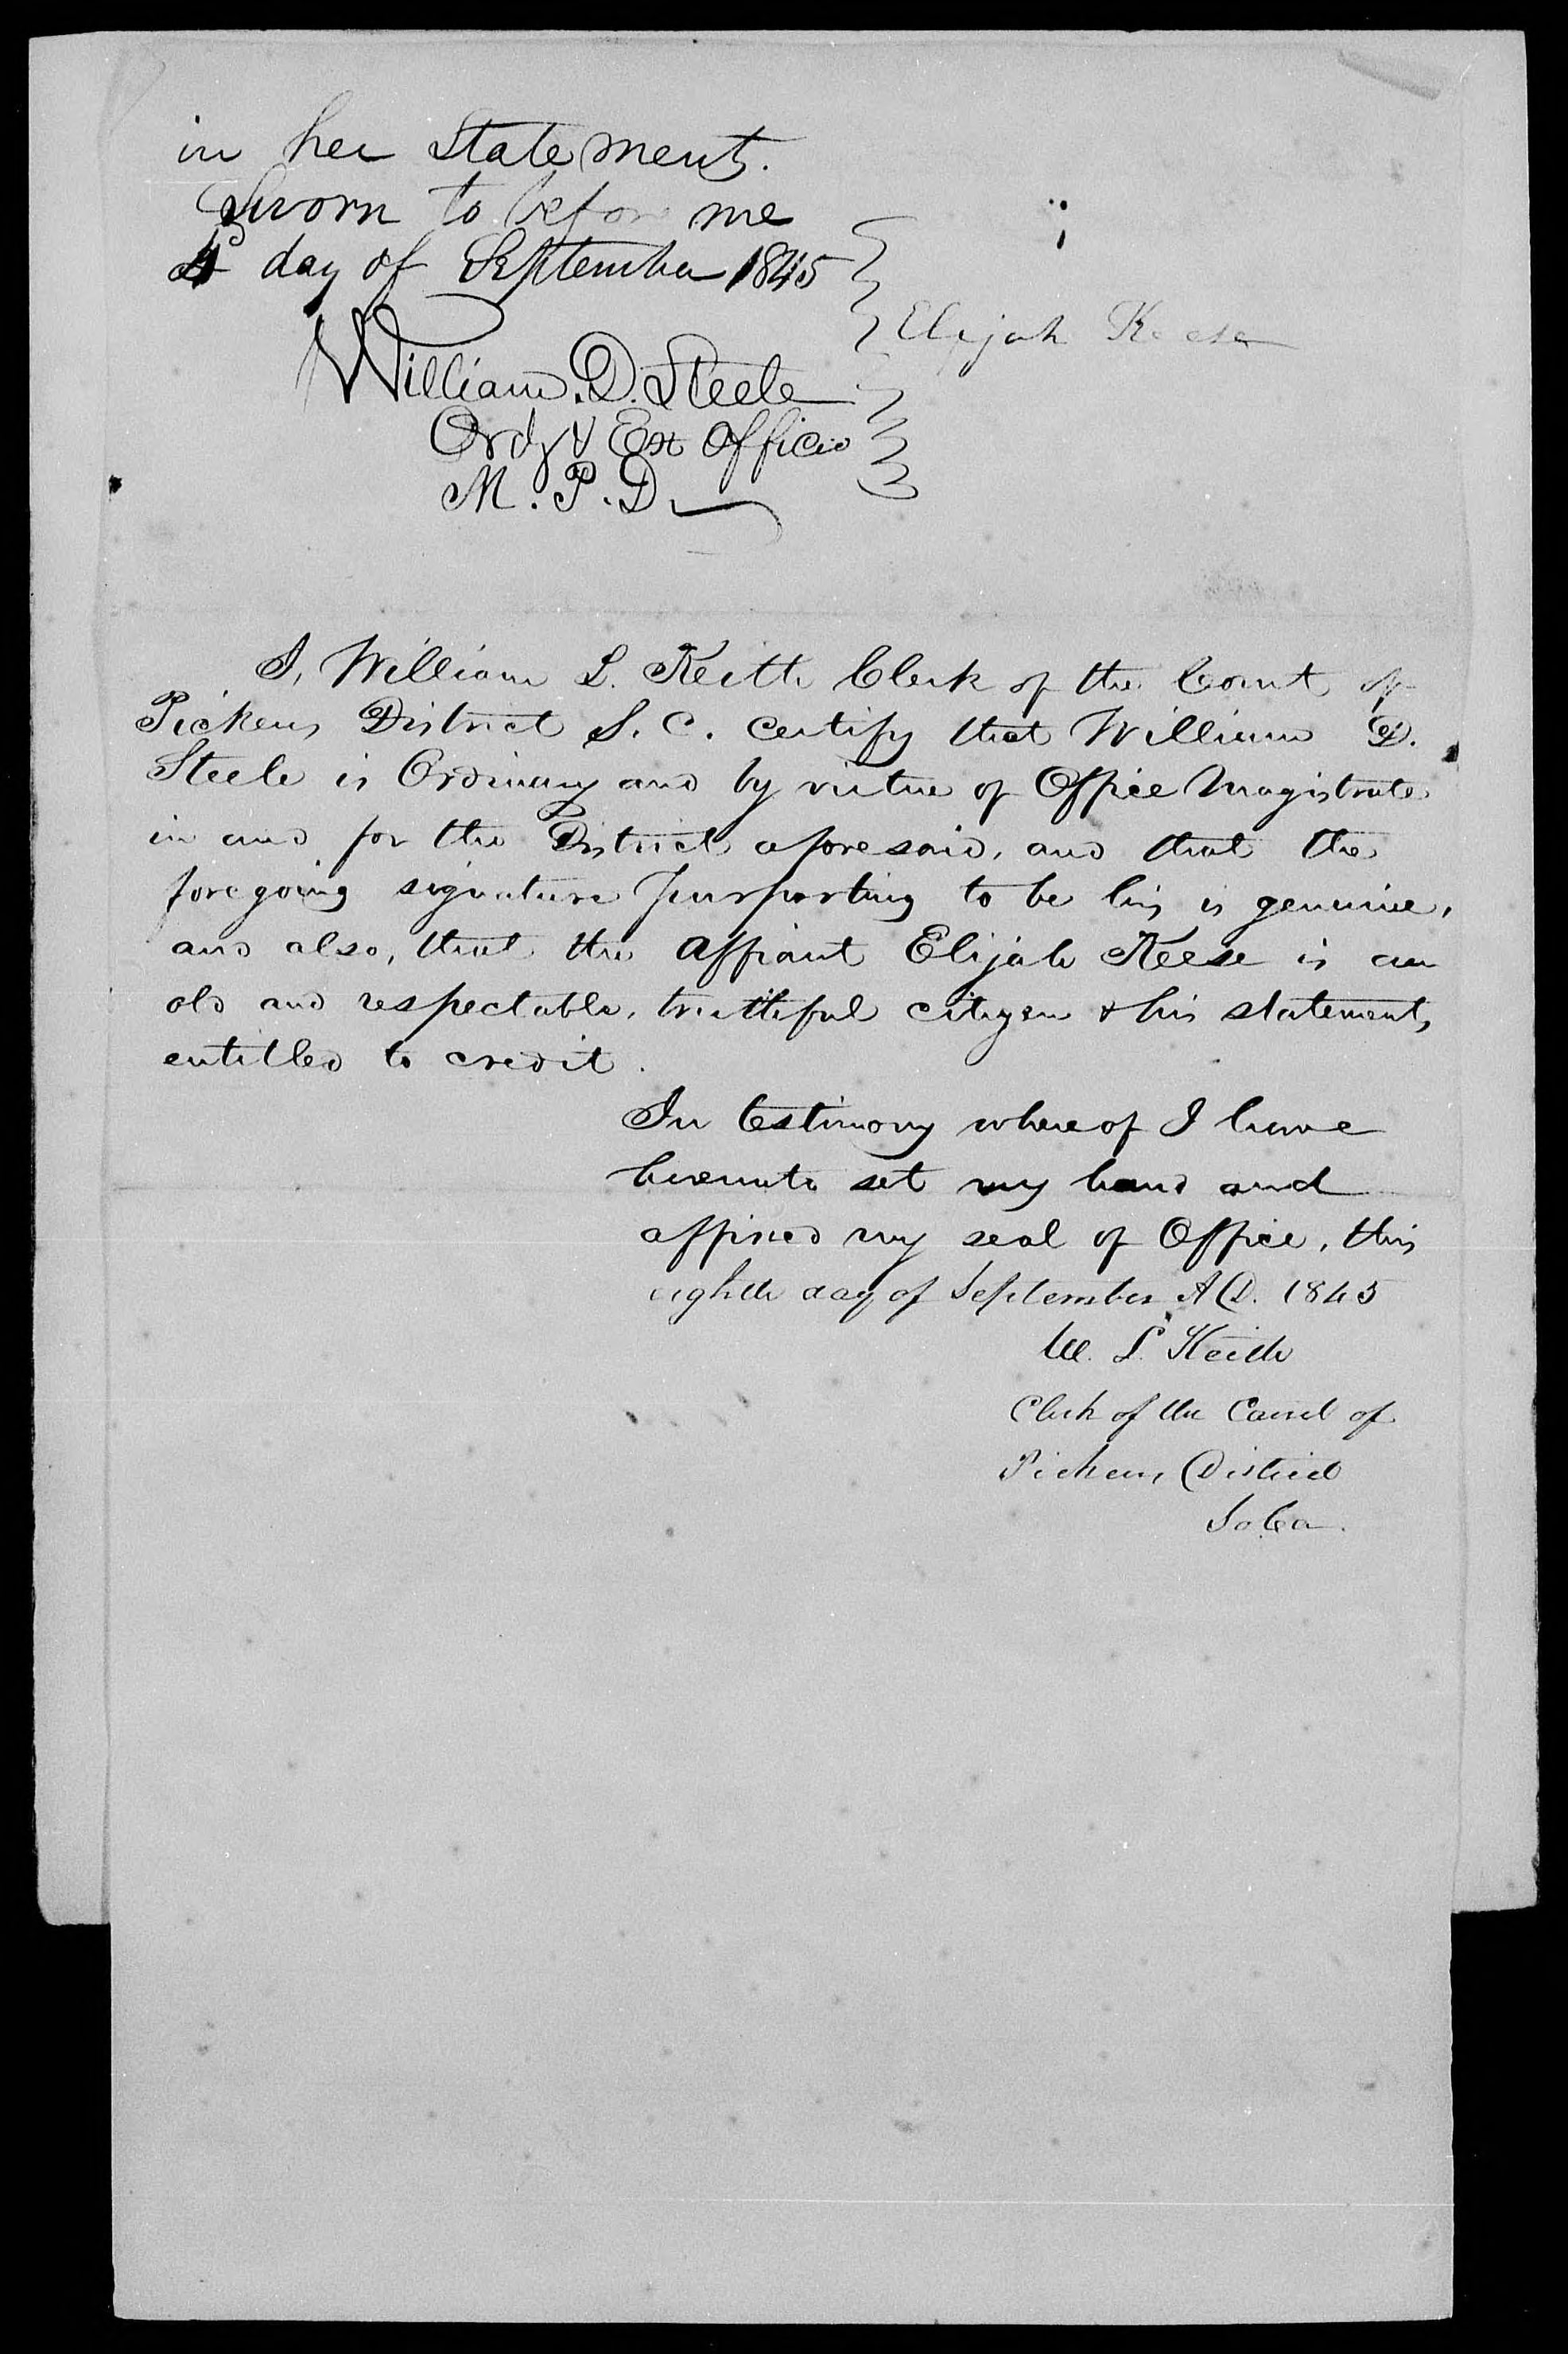 Affidavit of Elijah Keese in support of a Pension Claim for Anna Guest, 4 September 1845, page 2